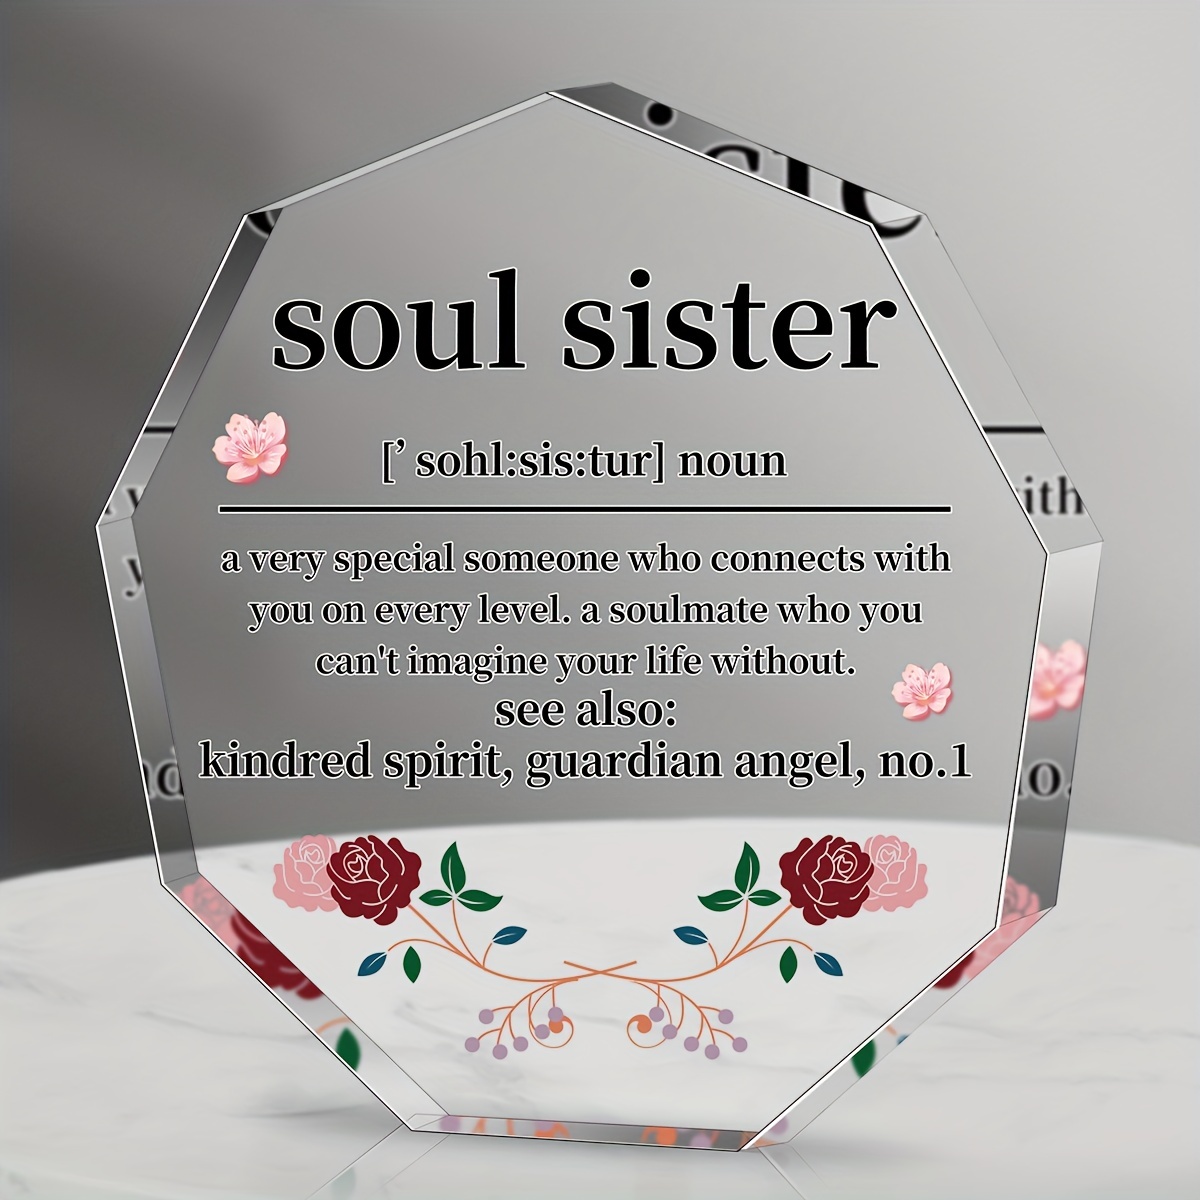 Sister Christmas Gifts,Sister Birthday Gift Ideas,Sisters Gifts